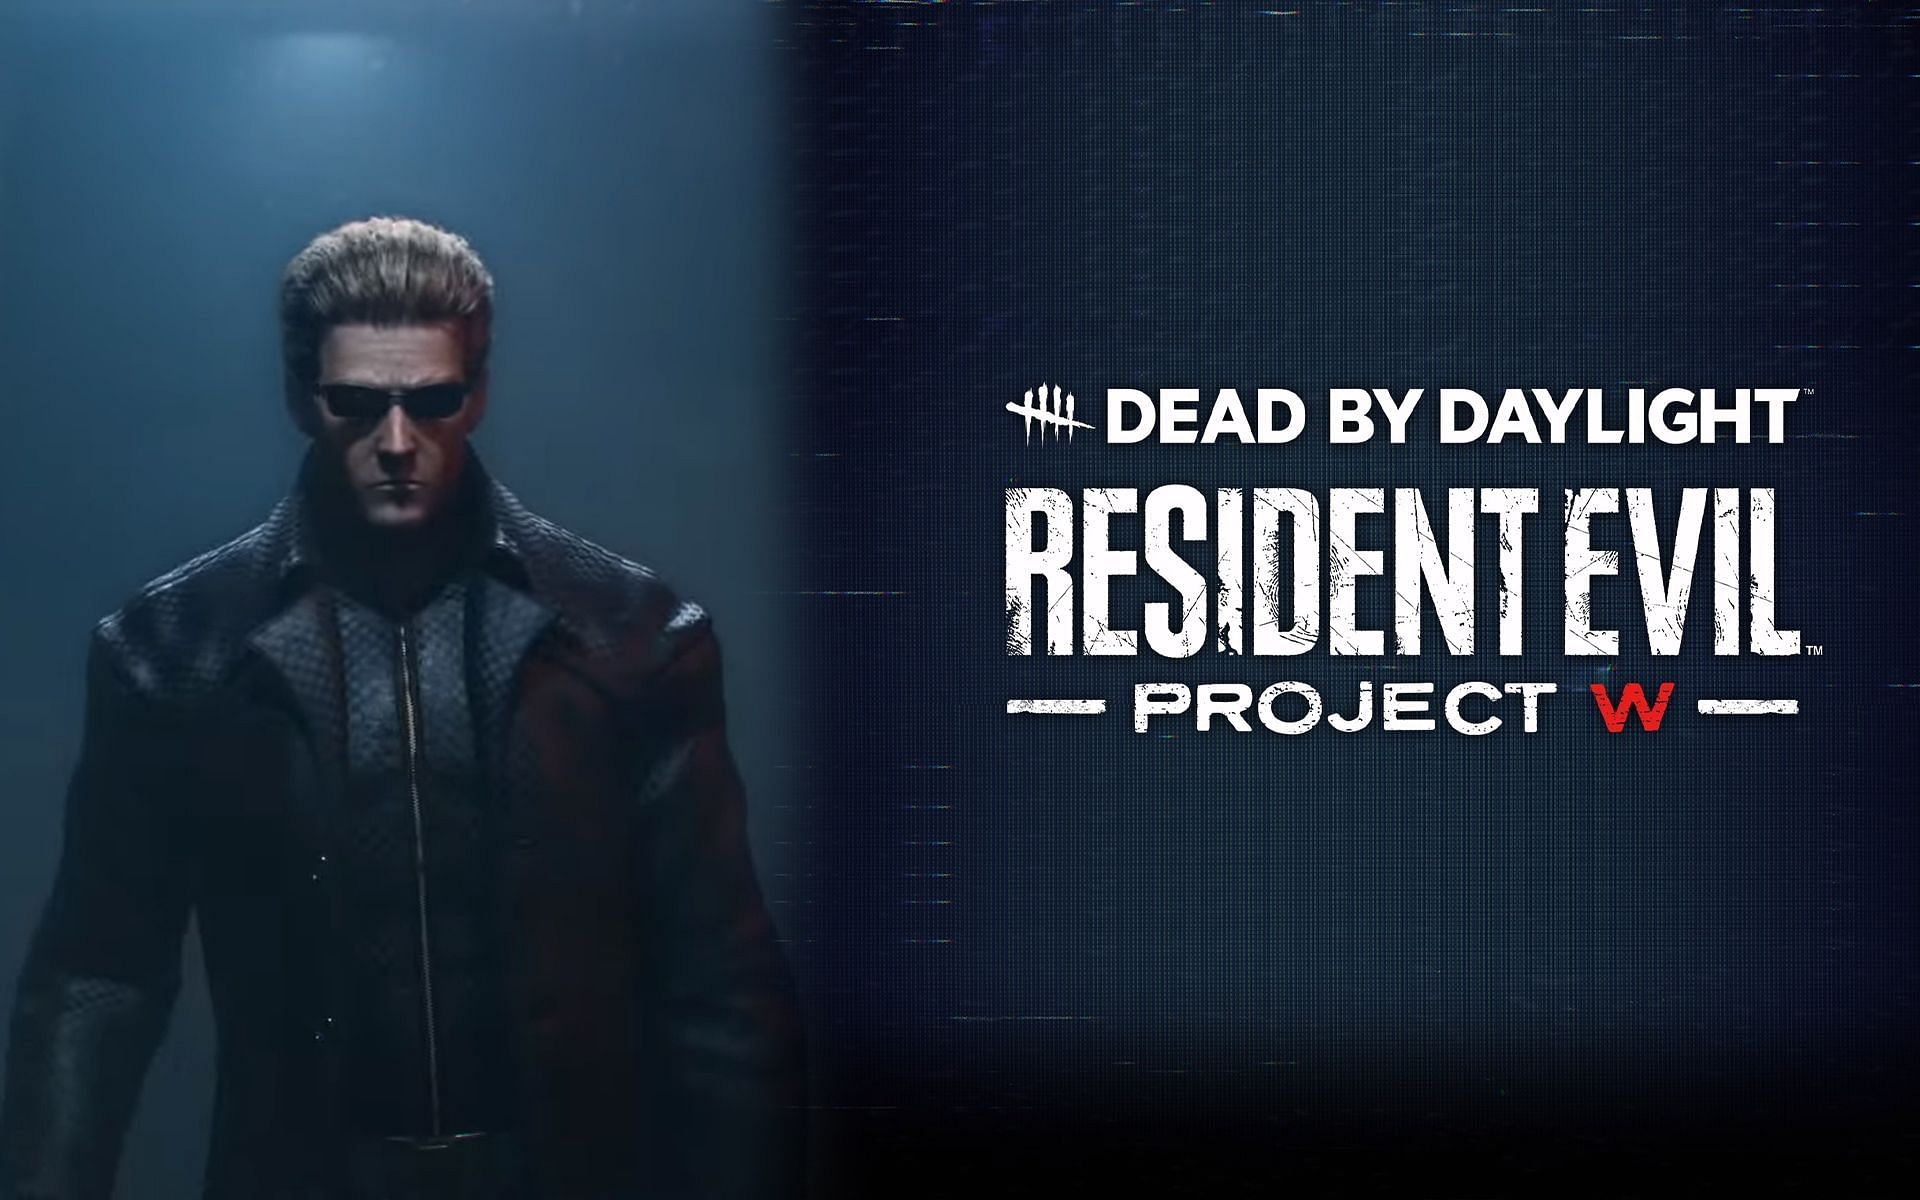 Latest Dead by Daylight crossover with Resident Evil brings Albert Wesker (Image by Sportskeeda)